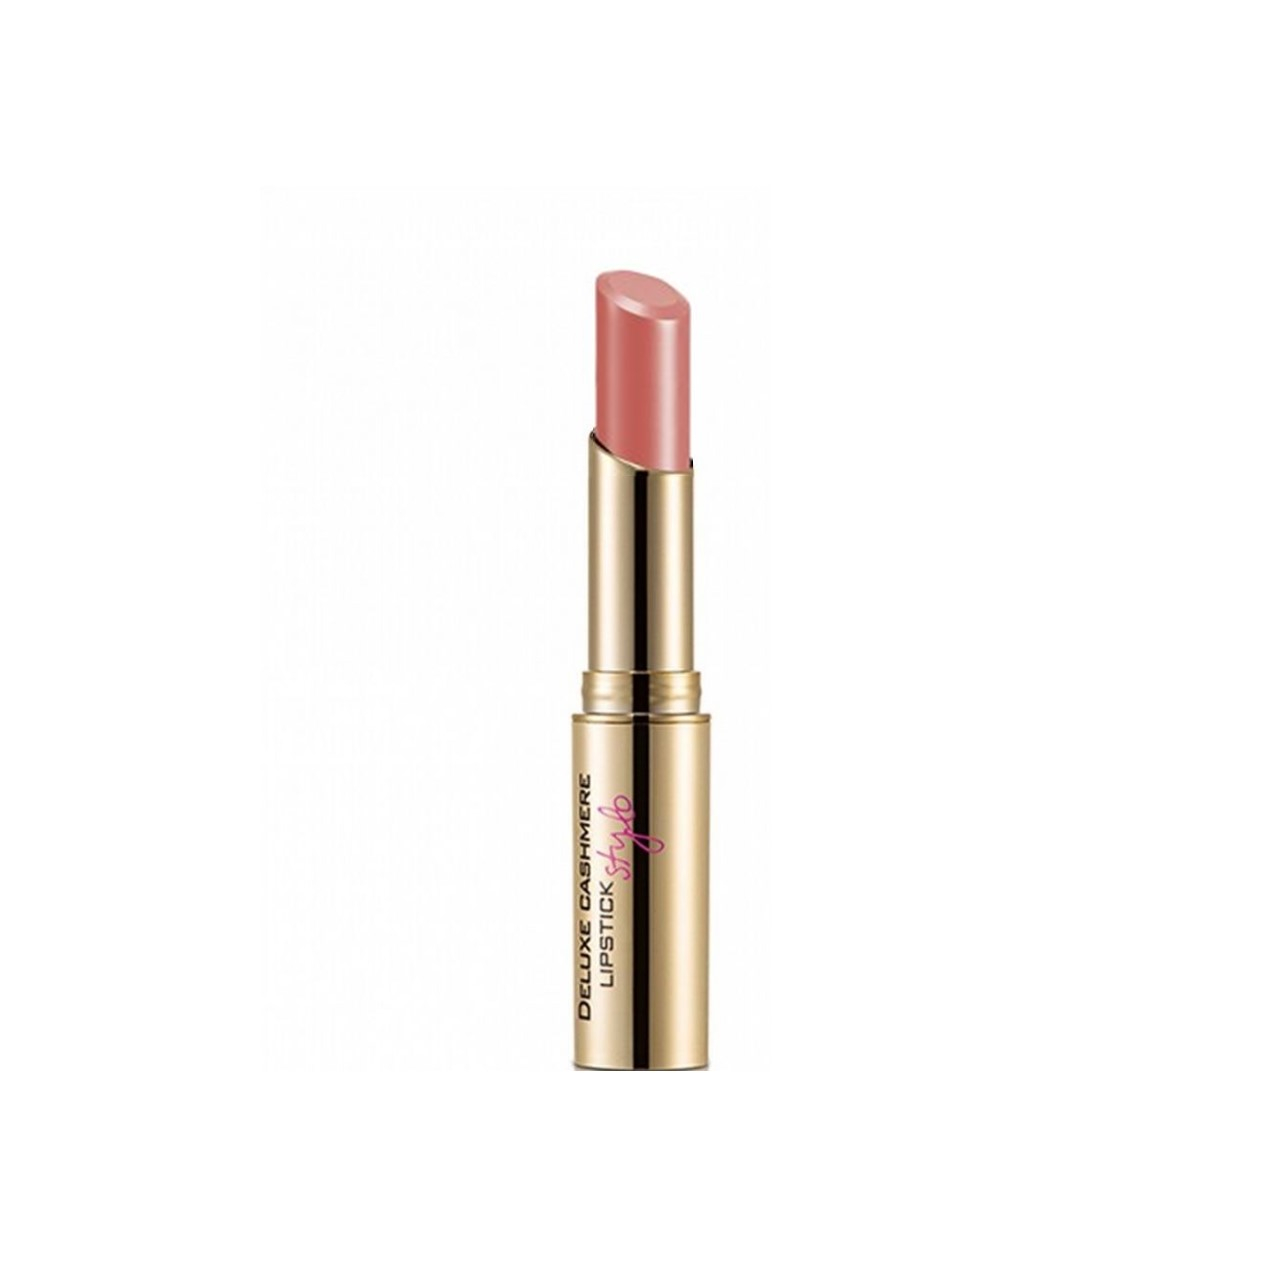 Flormar Deluxe Cashmere Lipstick Stylo DC36 Natural Rosewood 3g